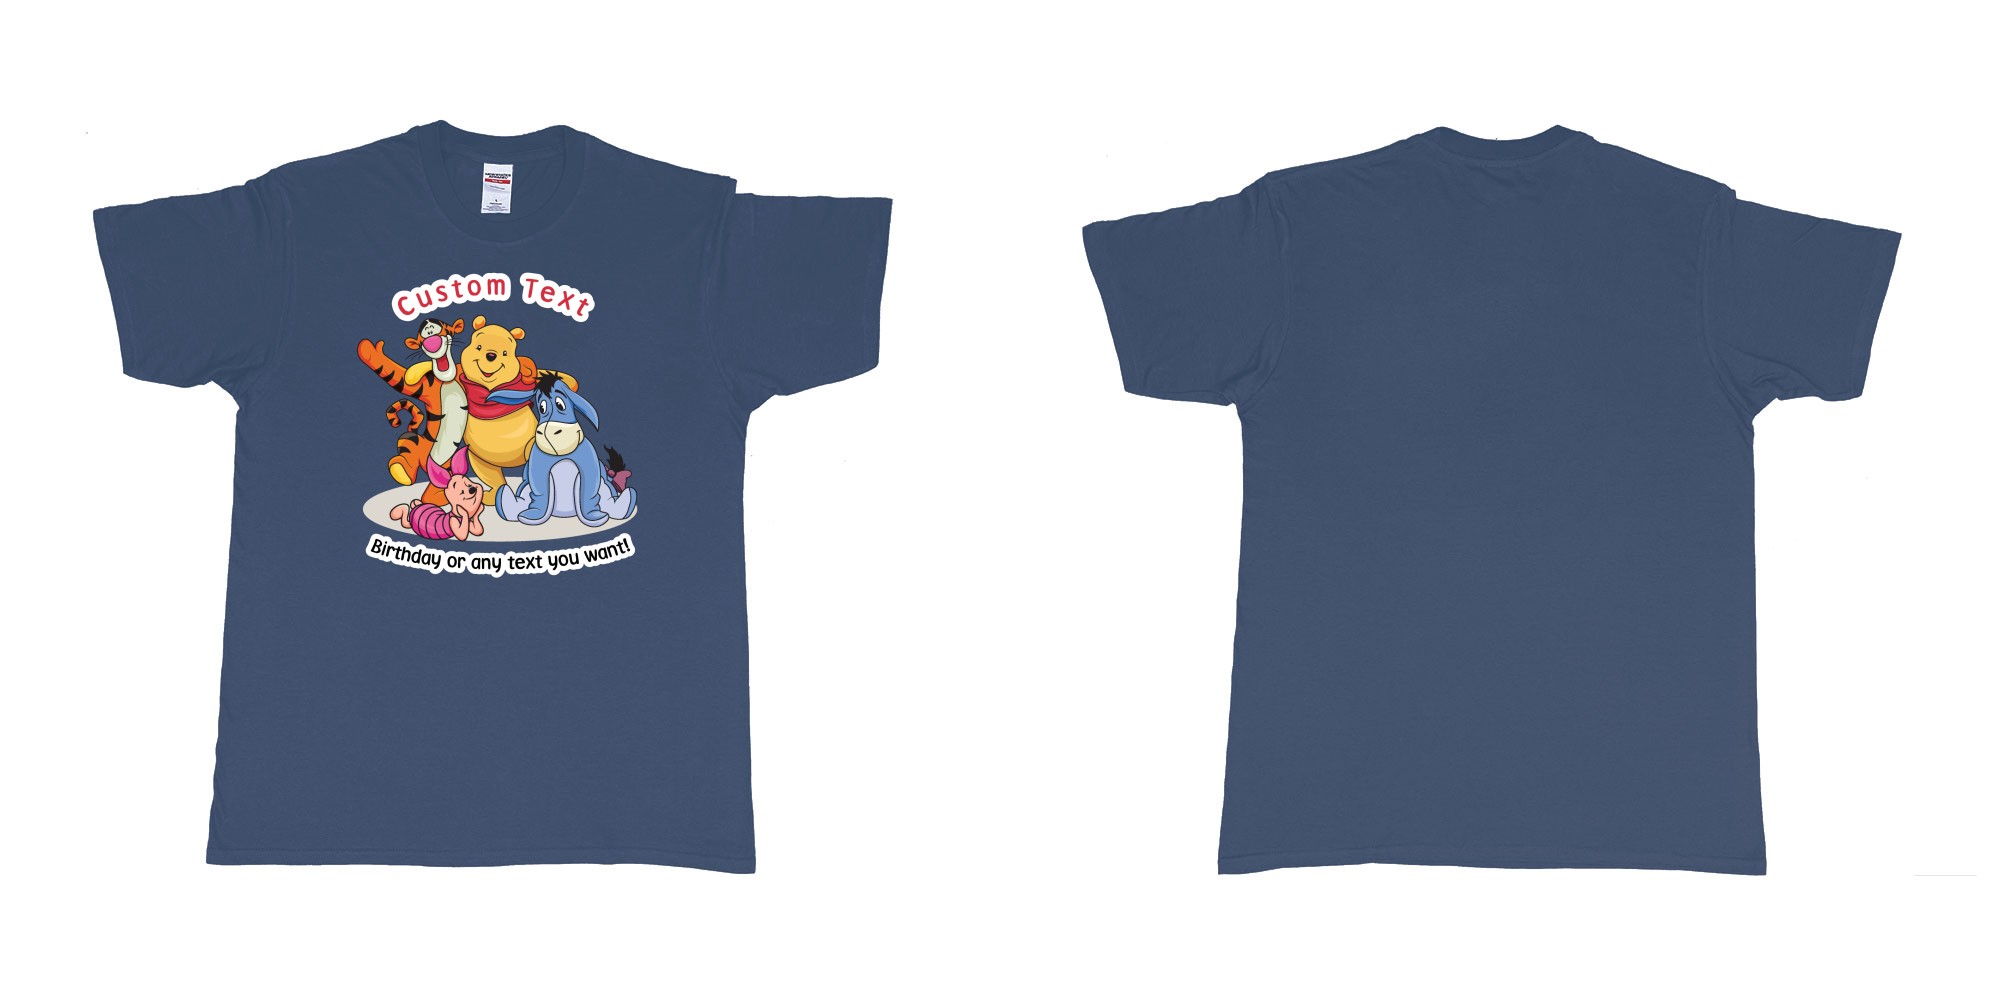 Custom tshirt design winnie the pooh and friend in fabric color navy choice your own text made in Bali by The Pirate Way